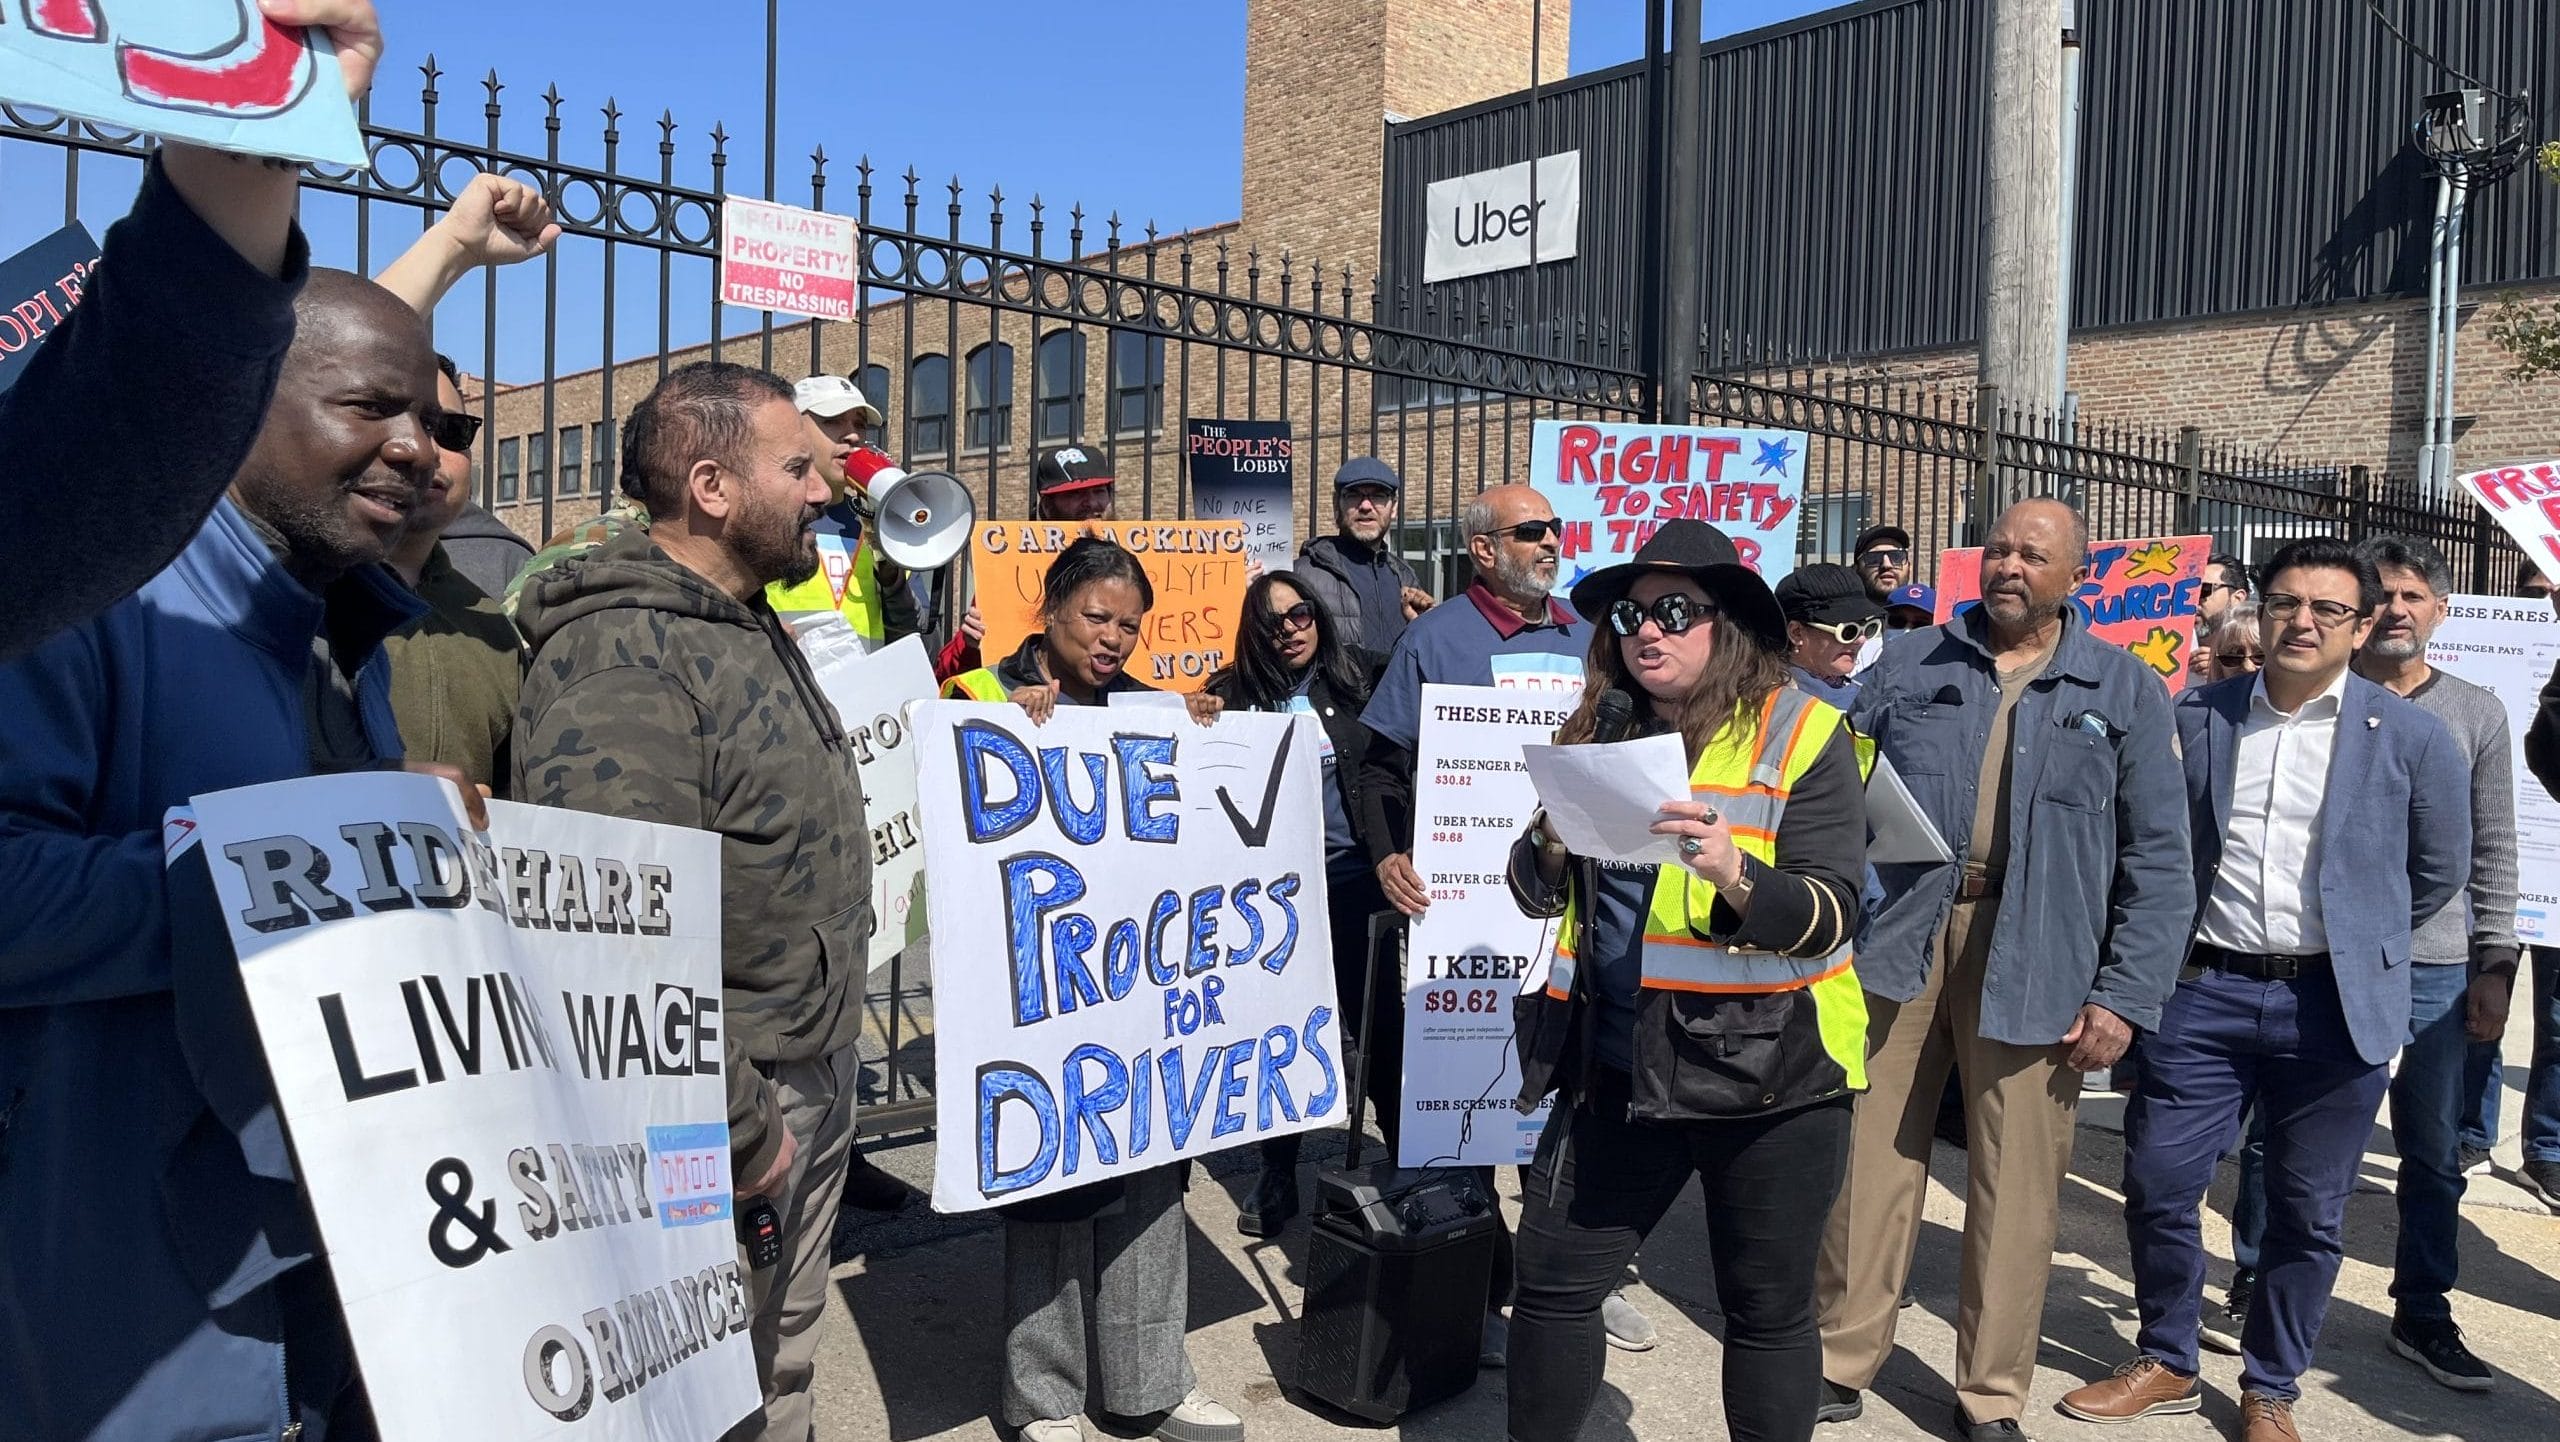 Drivers with the Chicago Gig Alliance rally outside Uber’s Chicago hub, courtesy of PowerSwitch Action